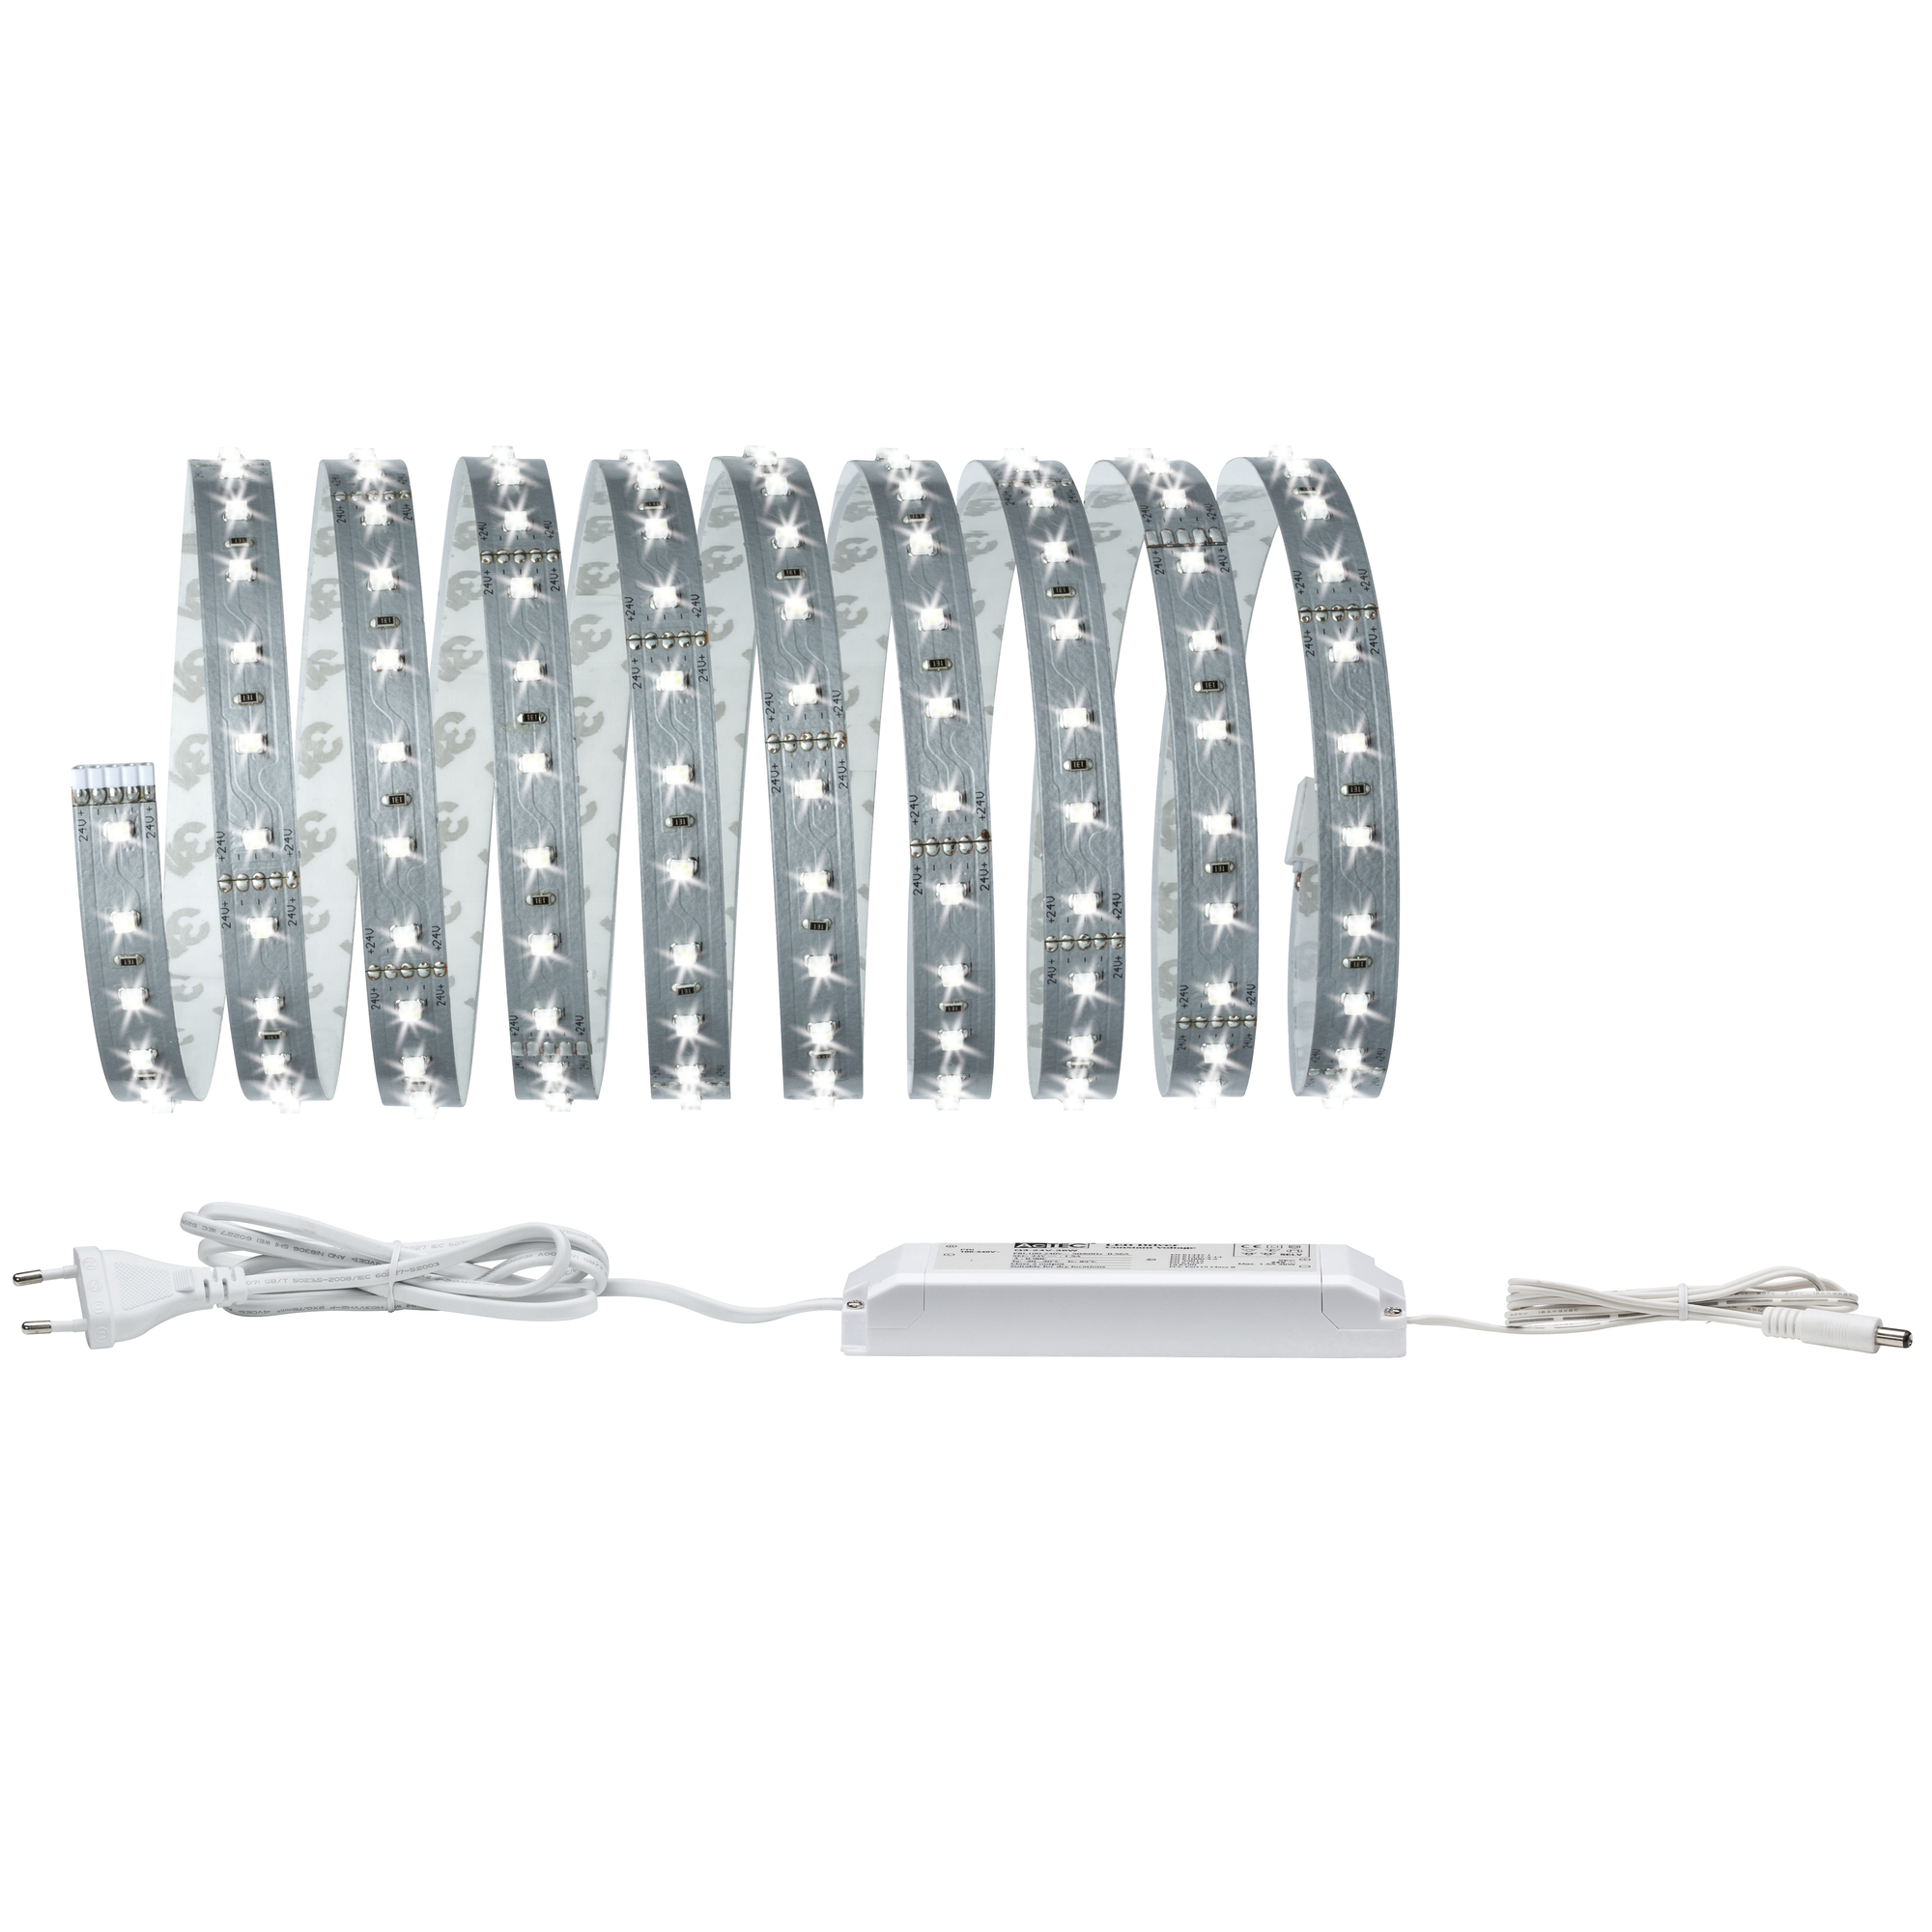 Function MaxLED 500 Basisset 3m Tageslichtweiß 17 W 230/24 V 36 VA Silber + product picture